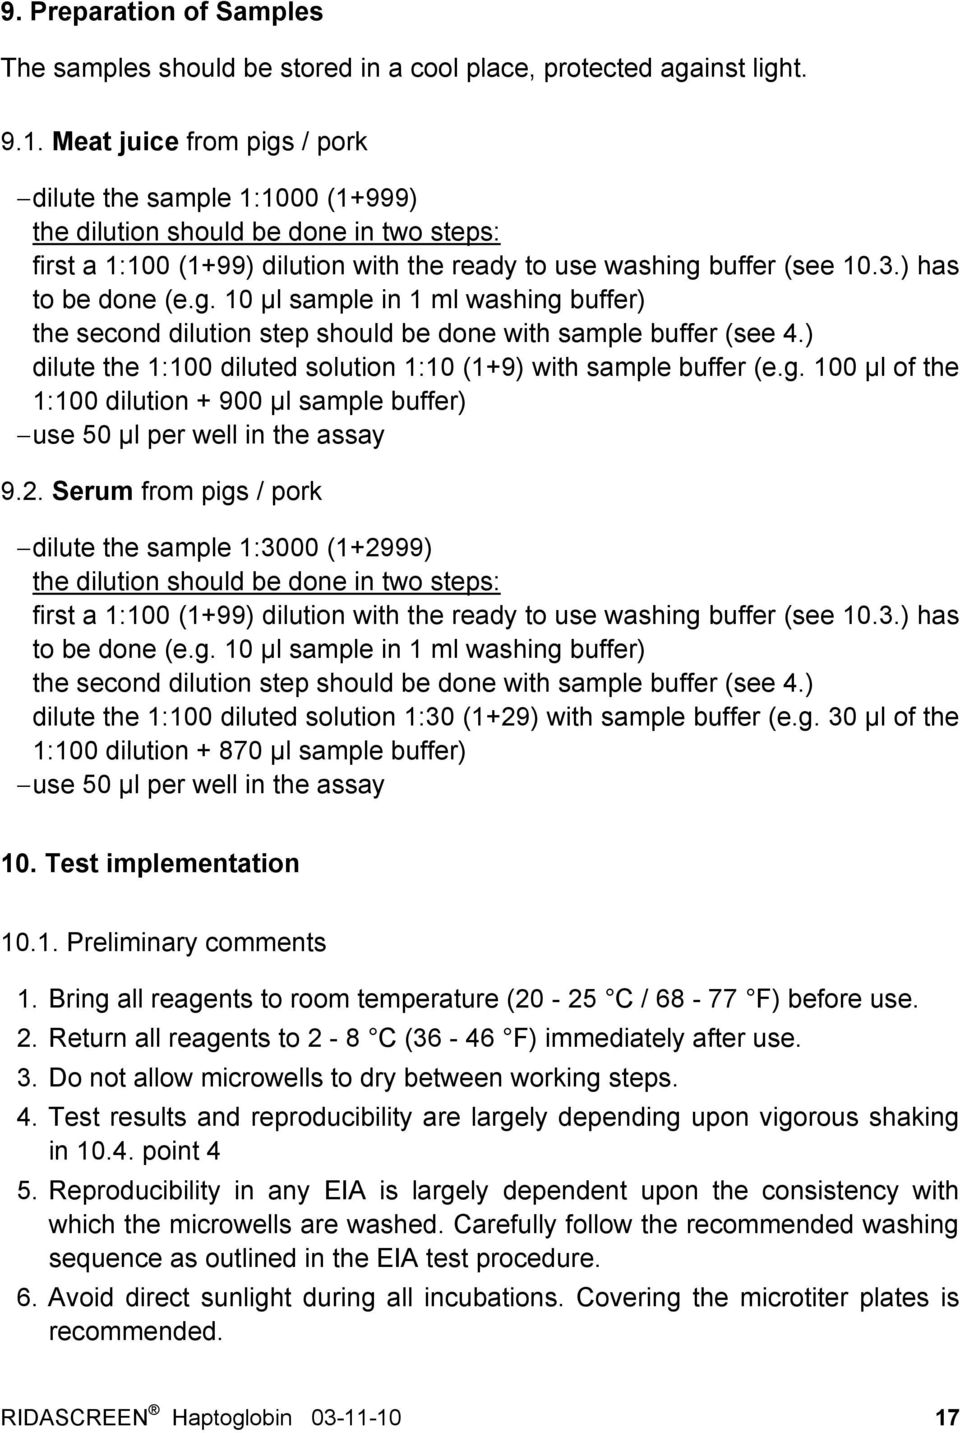 g. 10 µl sample in 1 ml washing buffer) the second dilution step should be done with sample buffer (see 4.) dilute the 1:100 diluted solution 1:10 (1+9) with sample buffer (e.g. 100 µl of the 1:100 dilution + 900 µl sample buffer) use 50 µl per well in the assay 9.